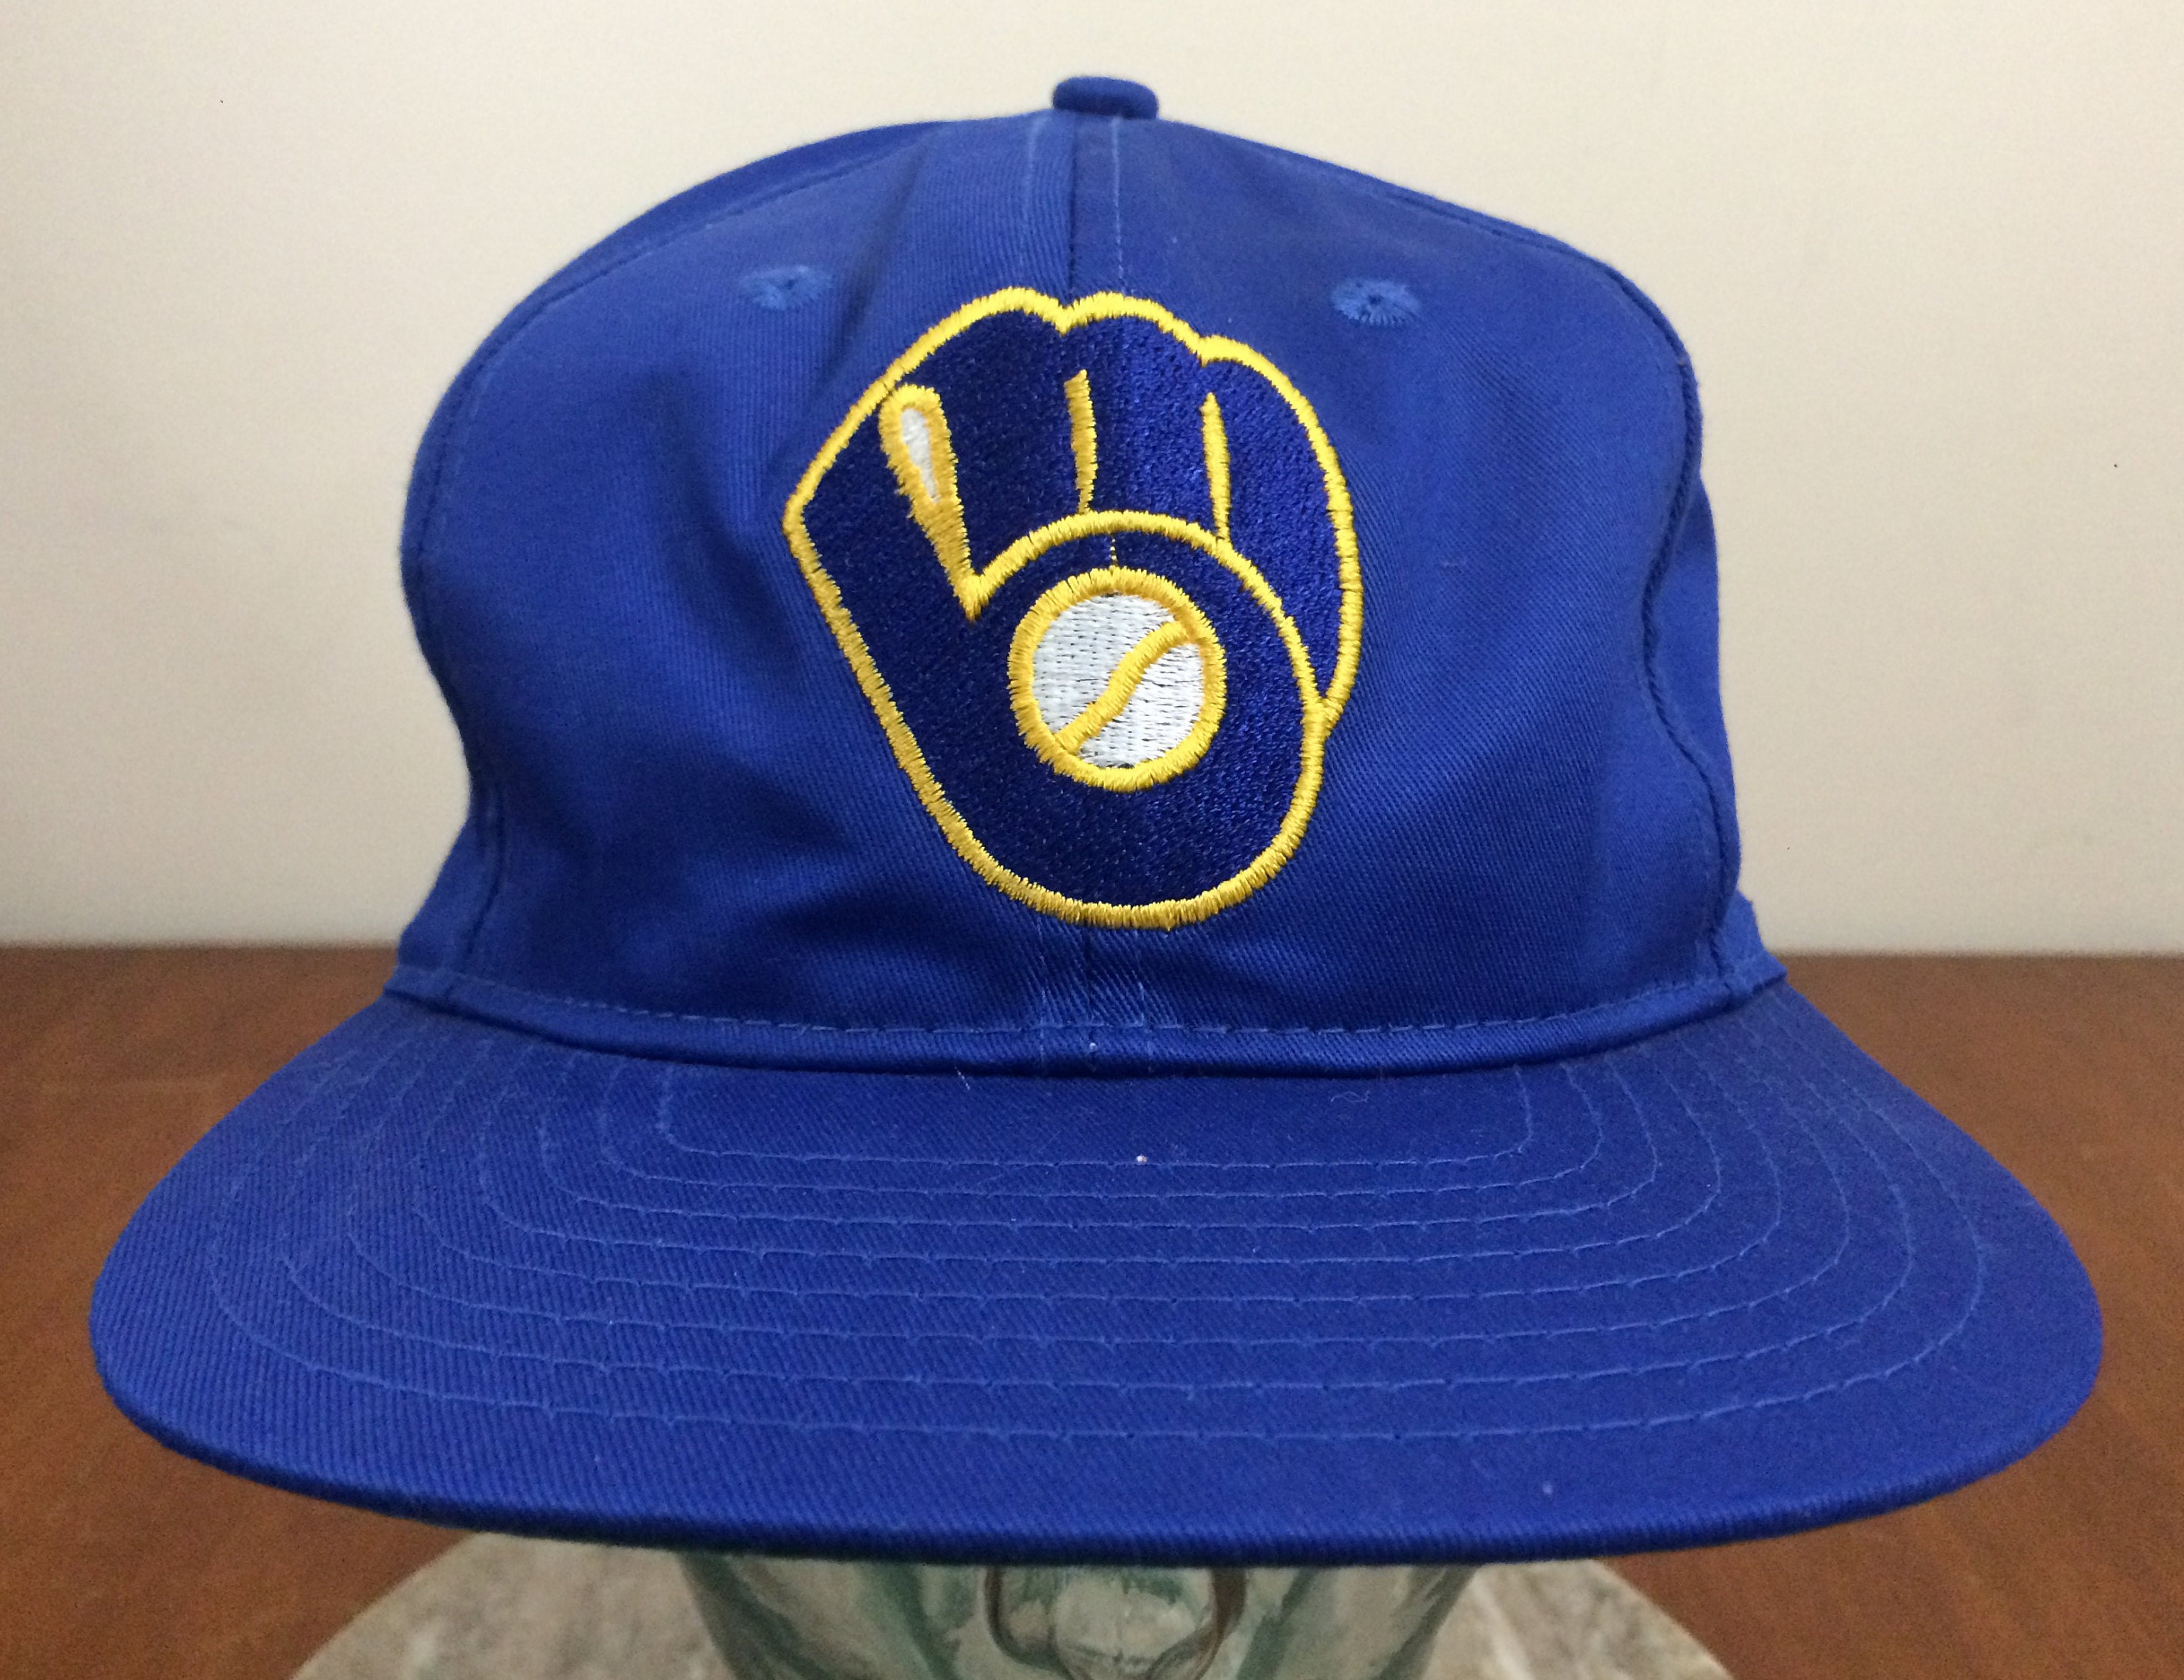 90's Milwaukee Brewers Baseball Cap Snapback Hat Genuine MLB Twins Ent Blue Gold Vintage 1990's Snap Back Wisconsin